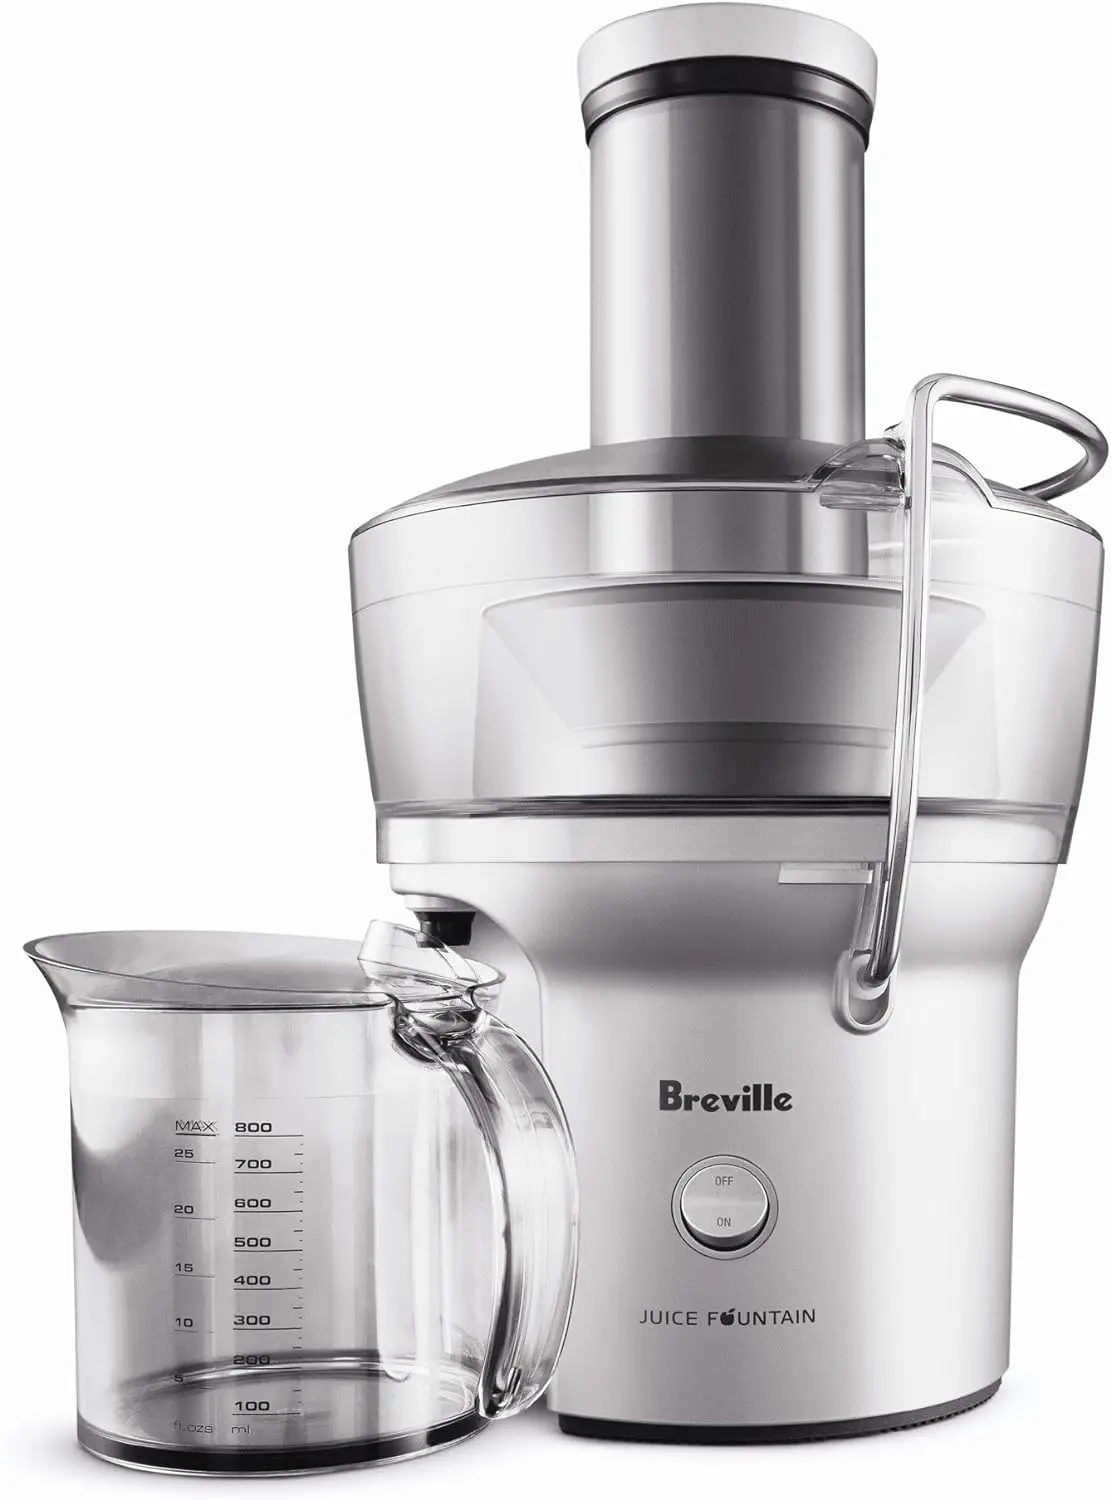 

Fountain Compact Juicer, Silver, BJE200XL